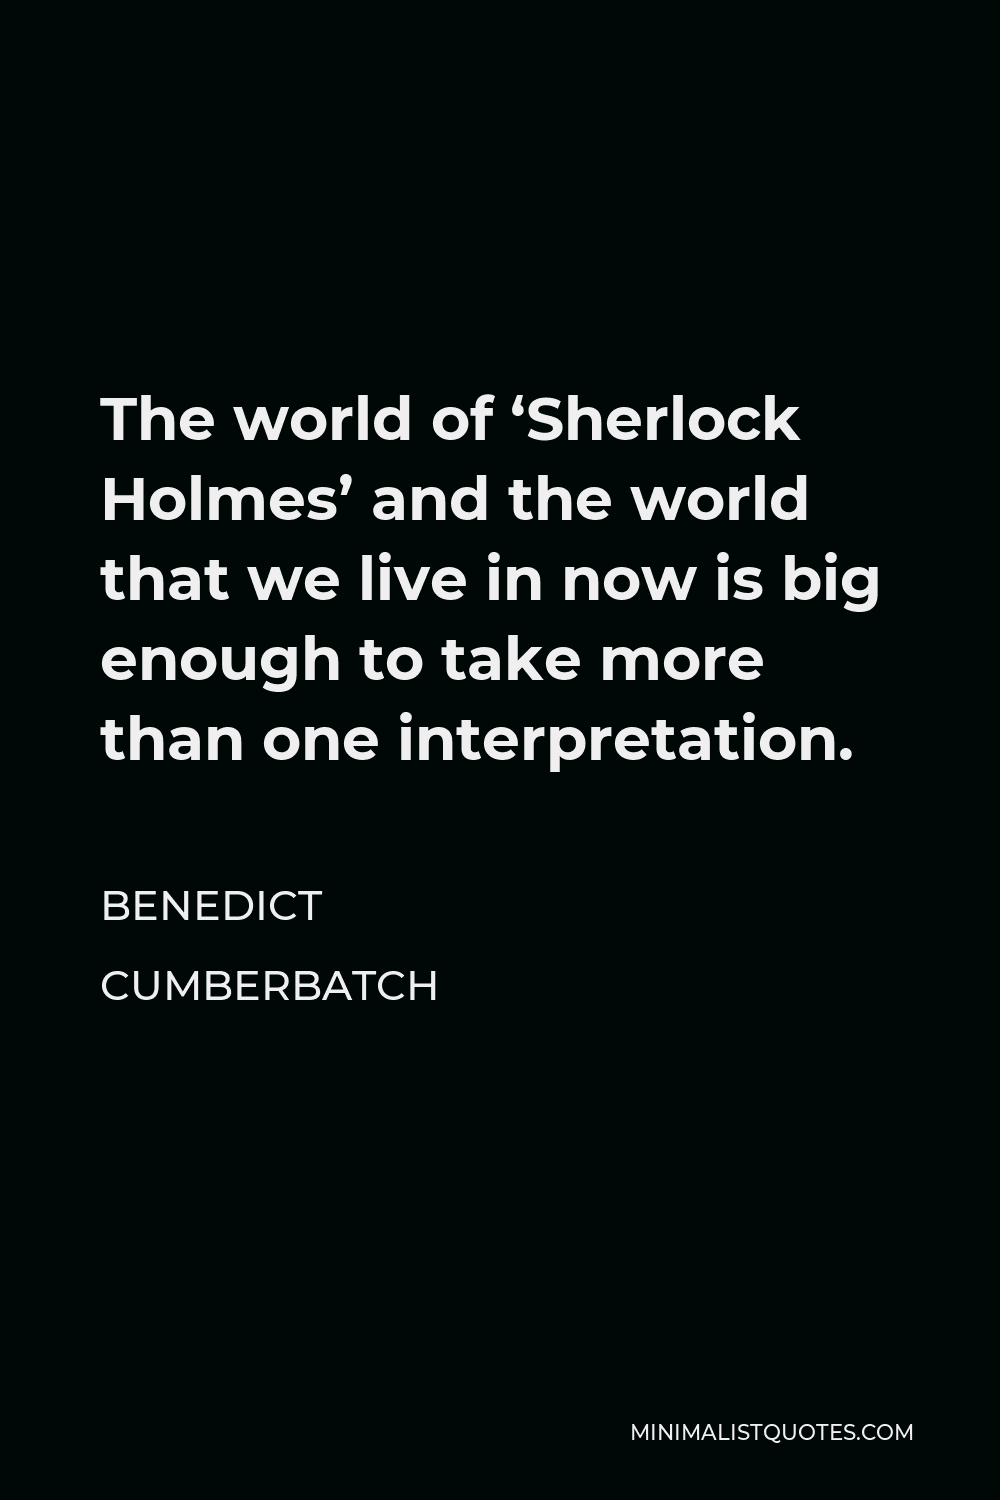 Benedict Cumberbatch Quote - The world of ‘Sherlock Holmes’ and the world that we live in now is big enough to take more than one interpretation.